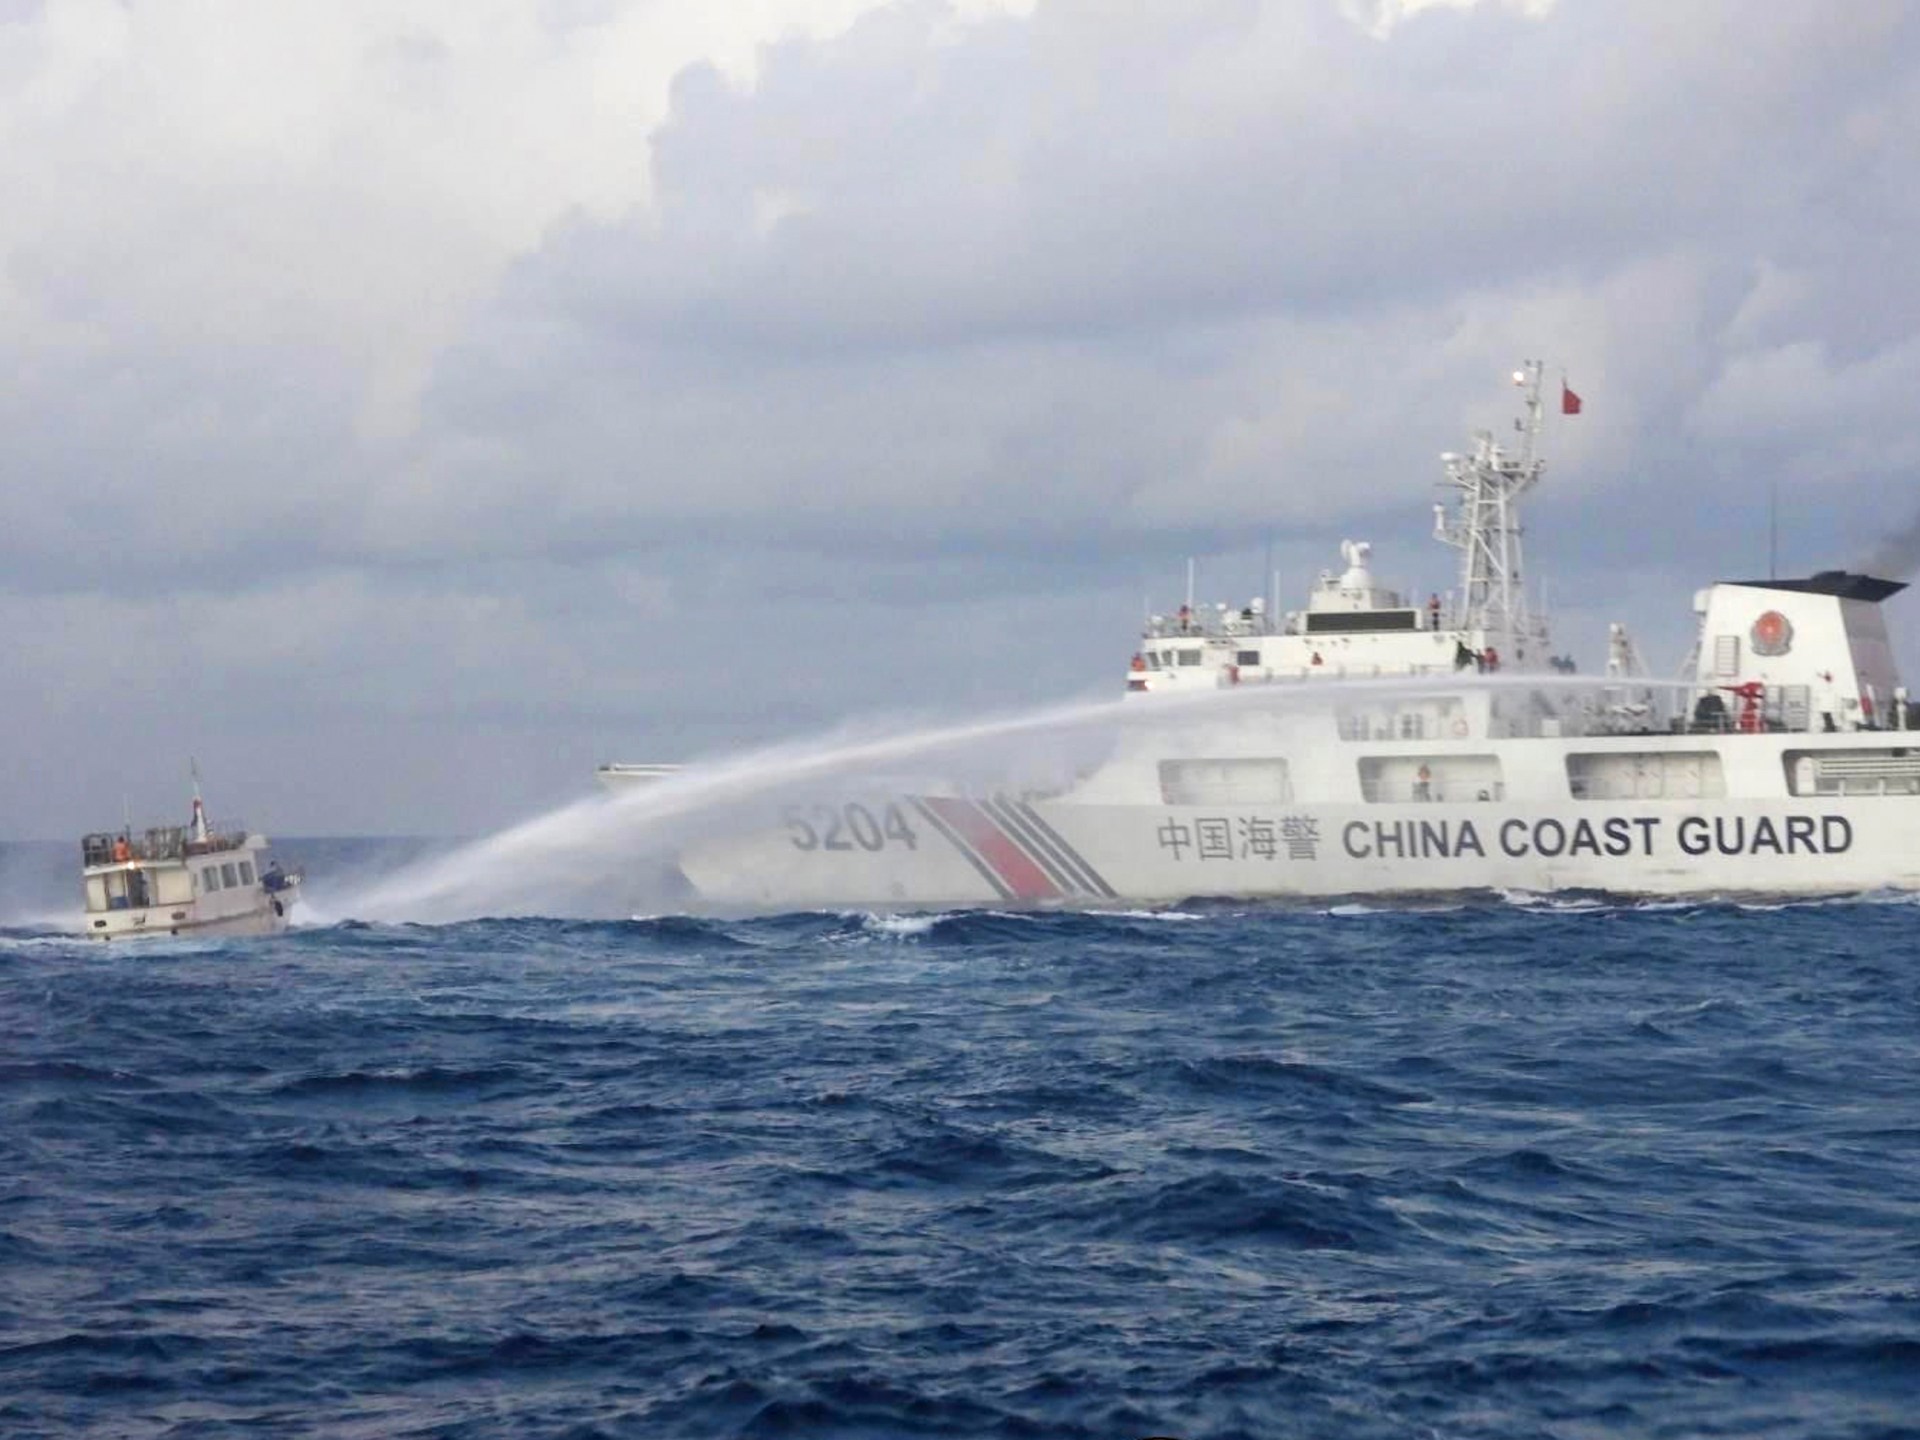 How an impasse in the South China Sea drove the Philippines, US closer | South China Sea News